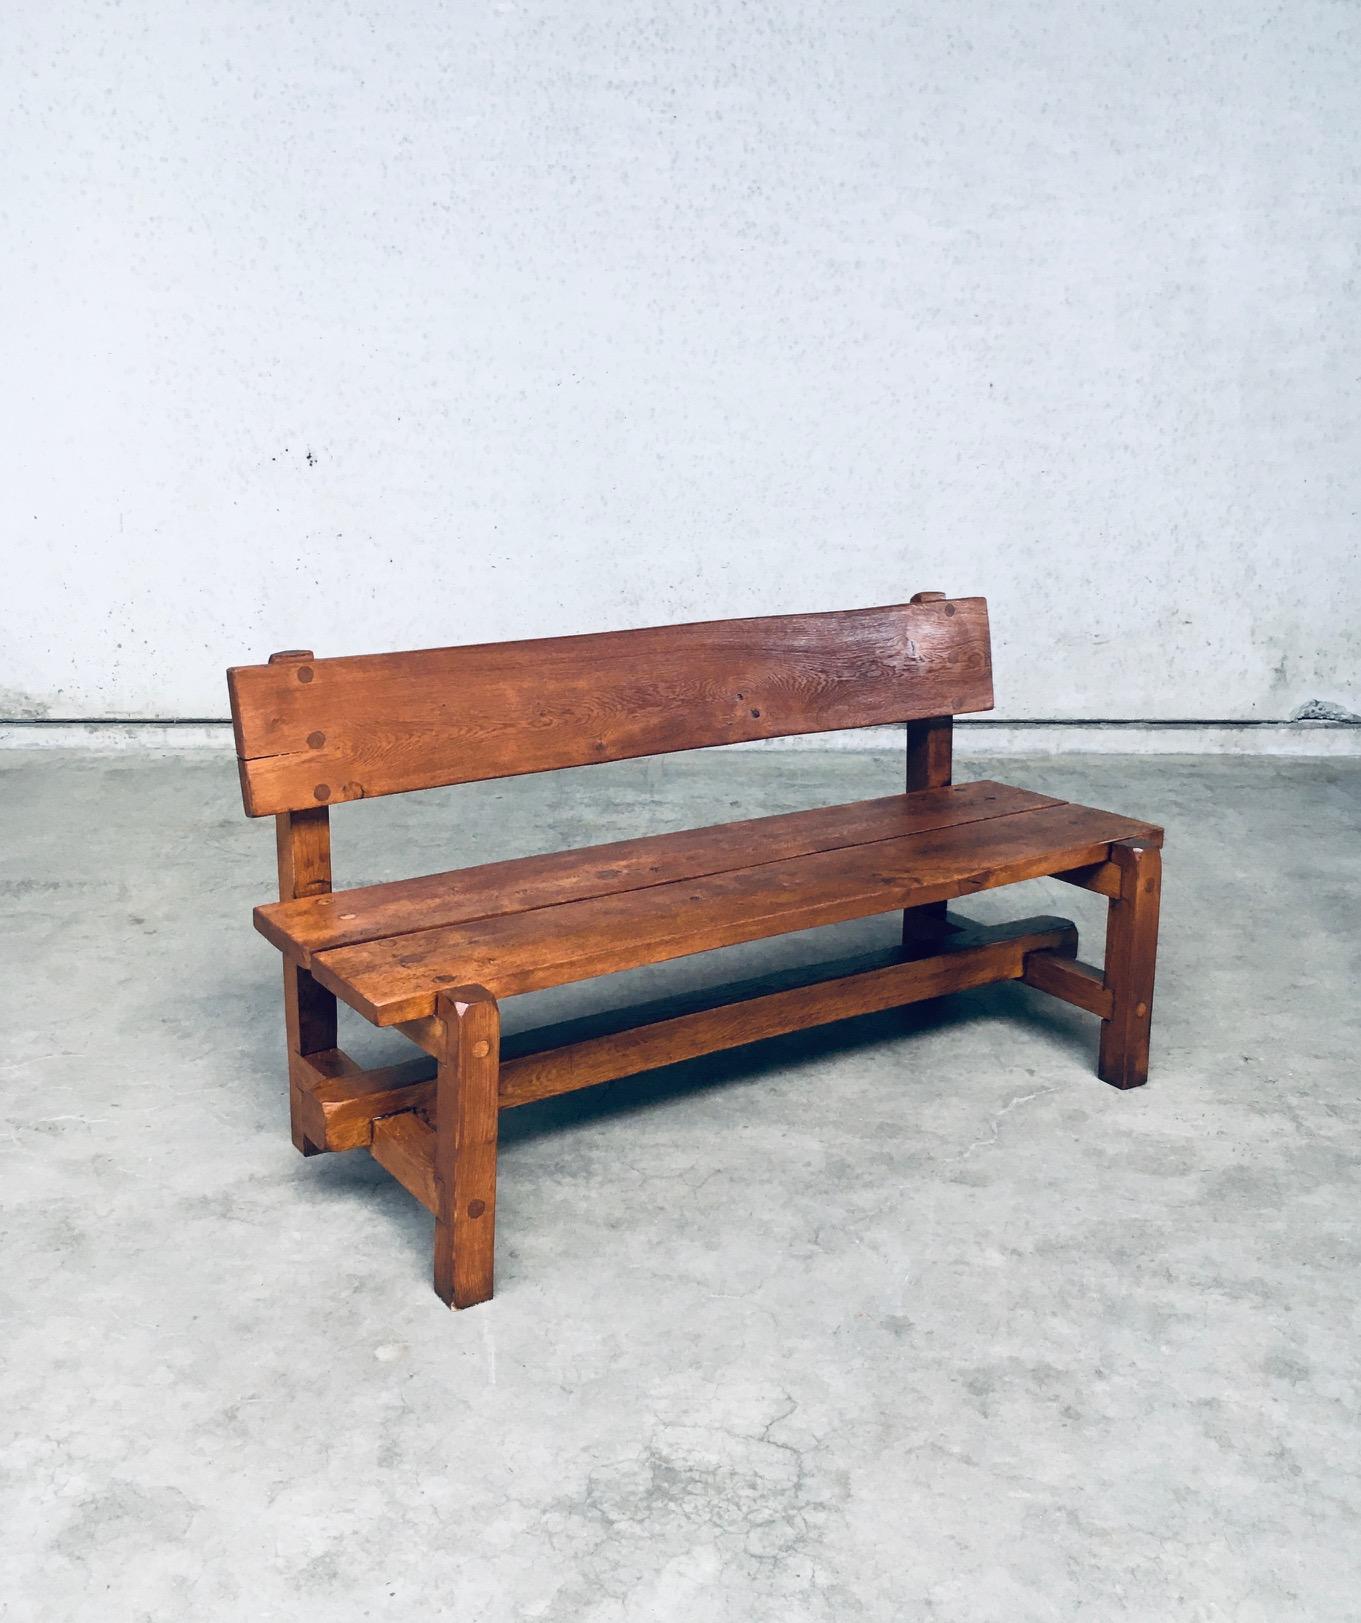 Vintage Midcentury period Brutalist Design Hand Crafted solid oak heavy Bench. Made in Belgium, 1960's / 70's period. Solid oak constrcuted heavy bench with thick beams and solid slabs of oak wood for seat and backrest. Nice constructivist in